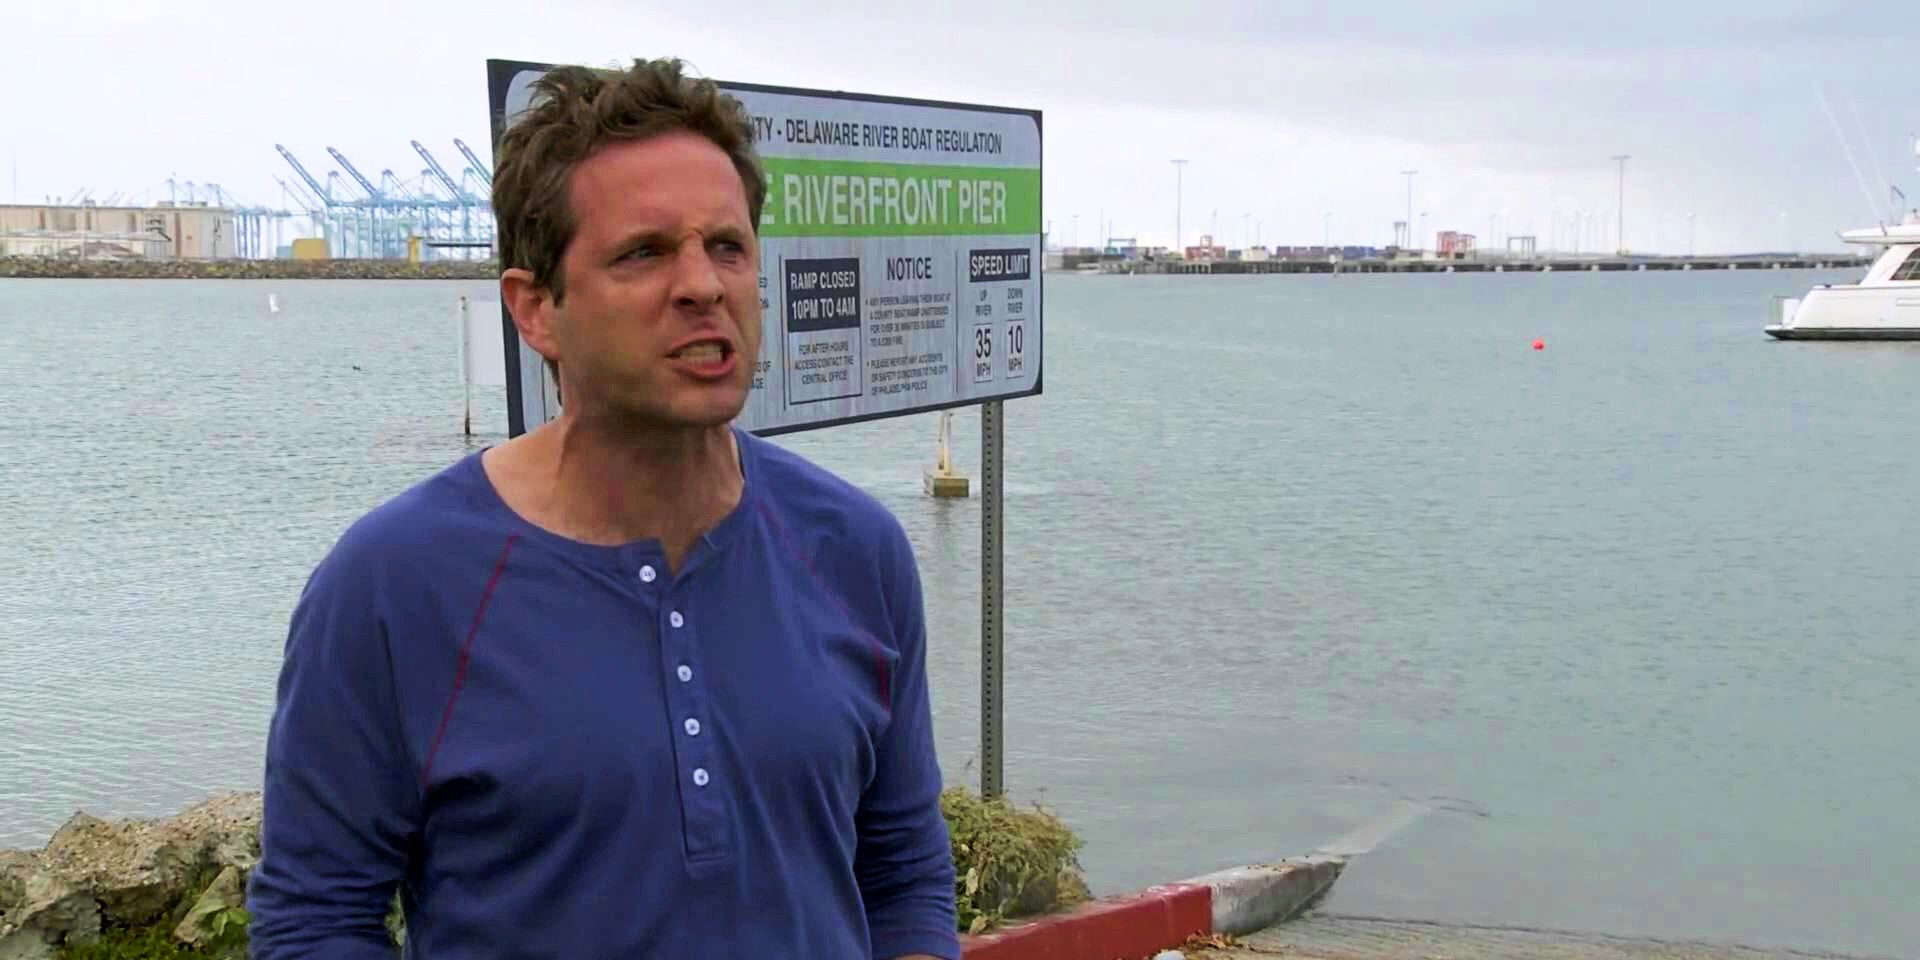 Dennis angrily shouts in front of a port in It's Always Sunny in Philadelphia.